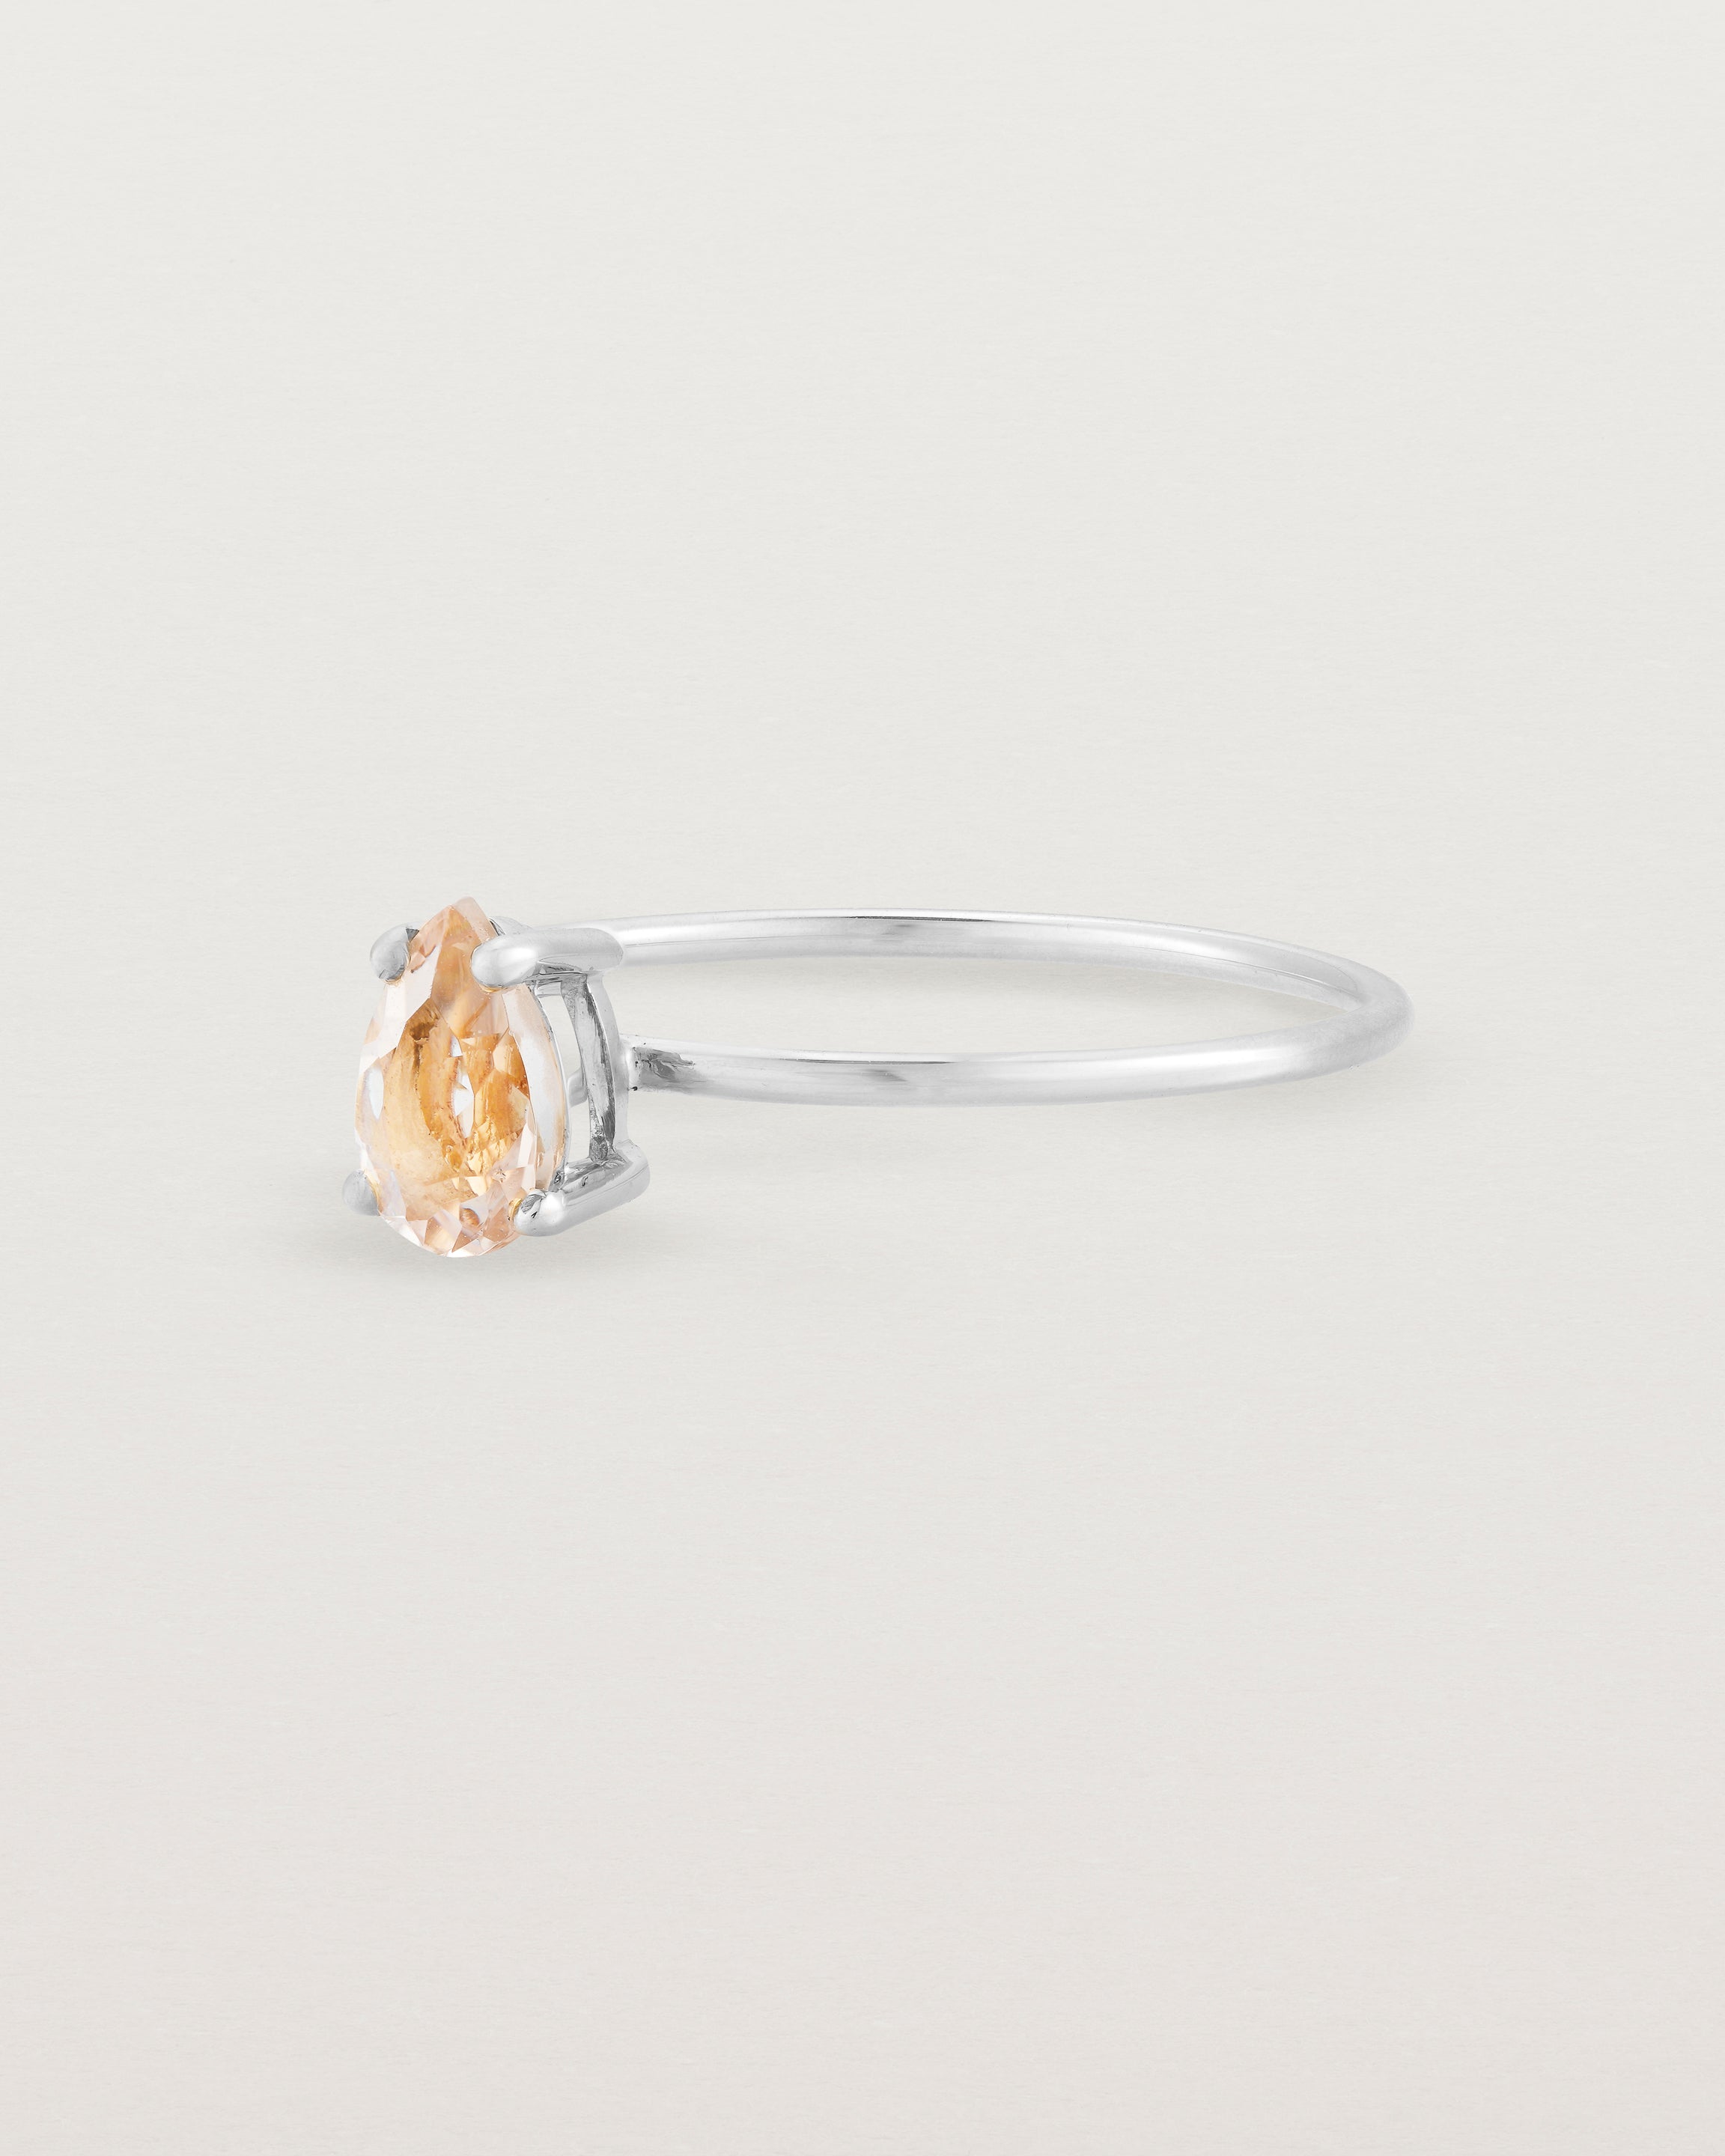 A fine white gold ring featuring a pear shaped pink morganite stone